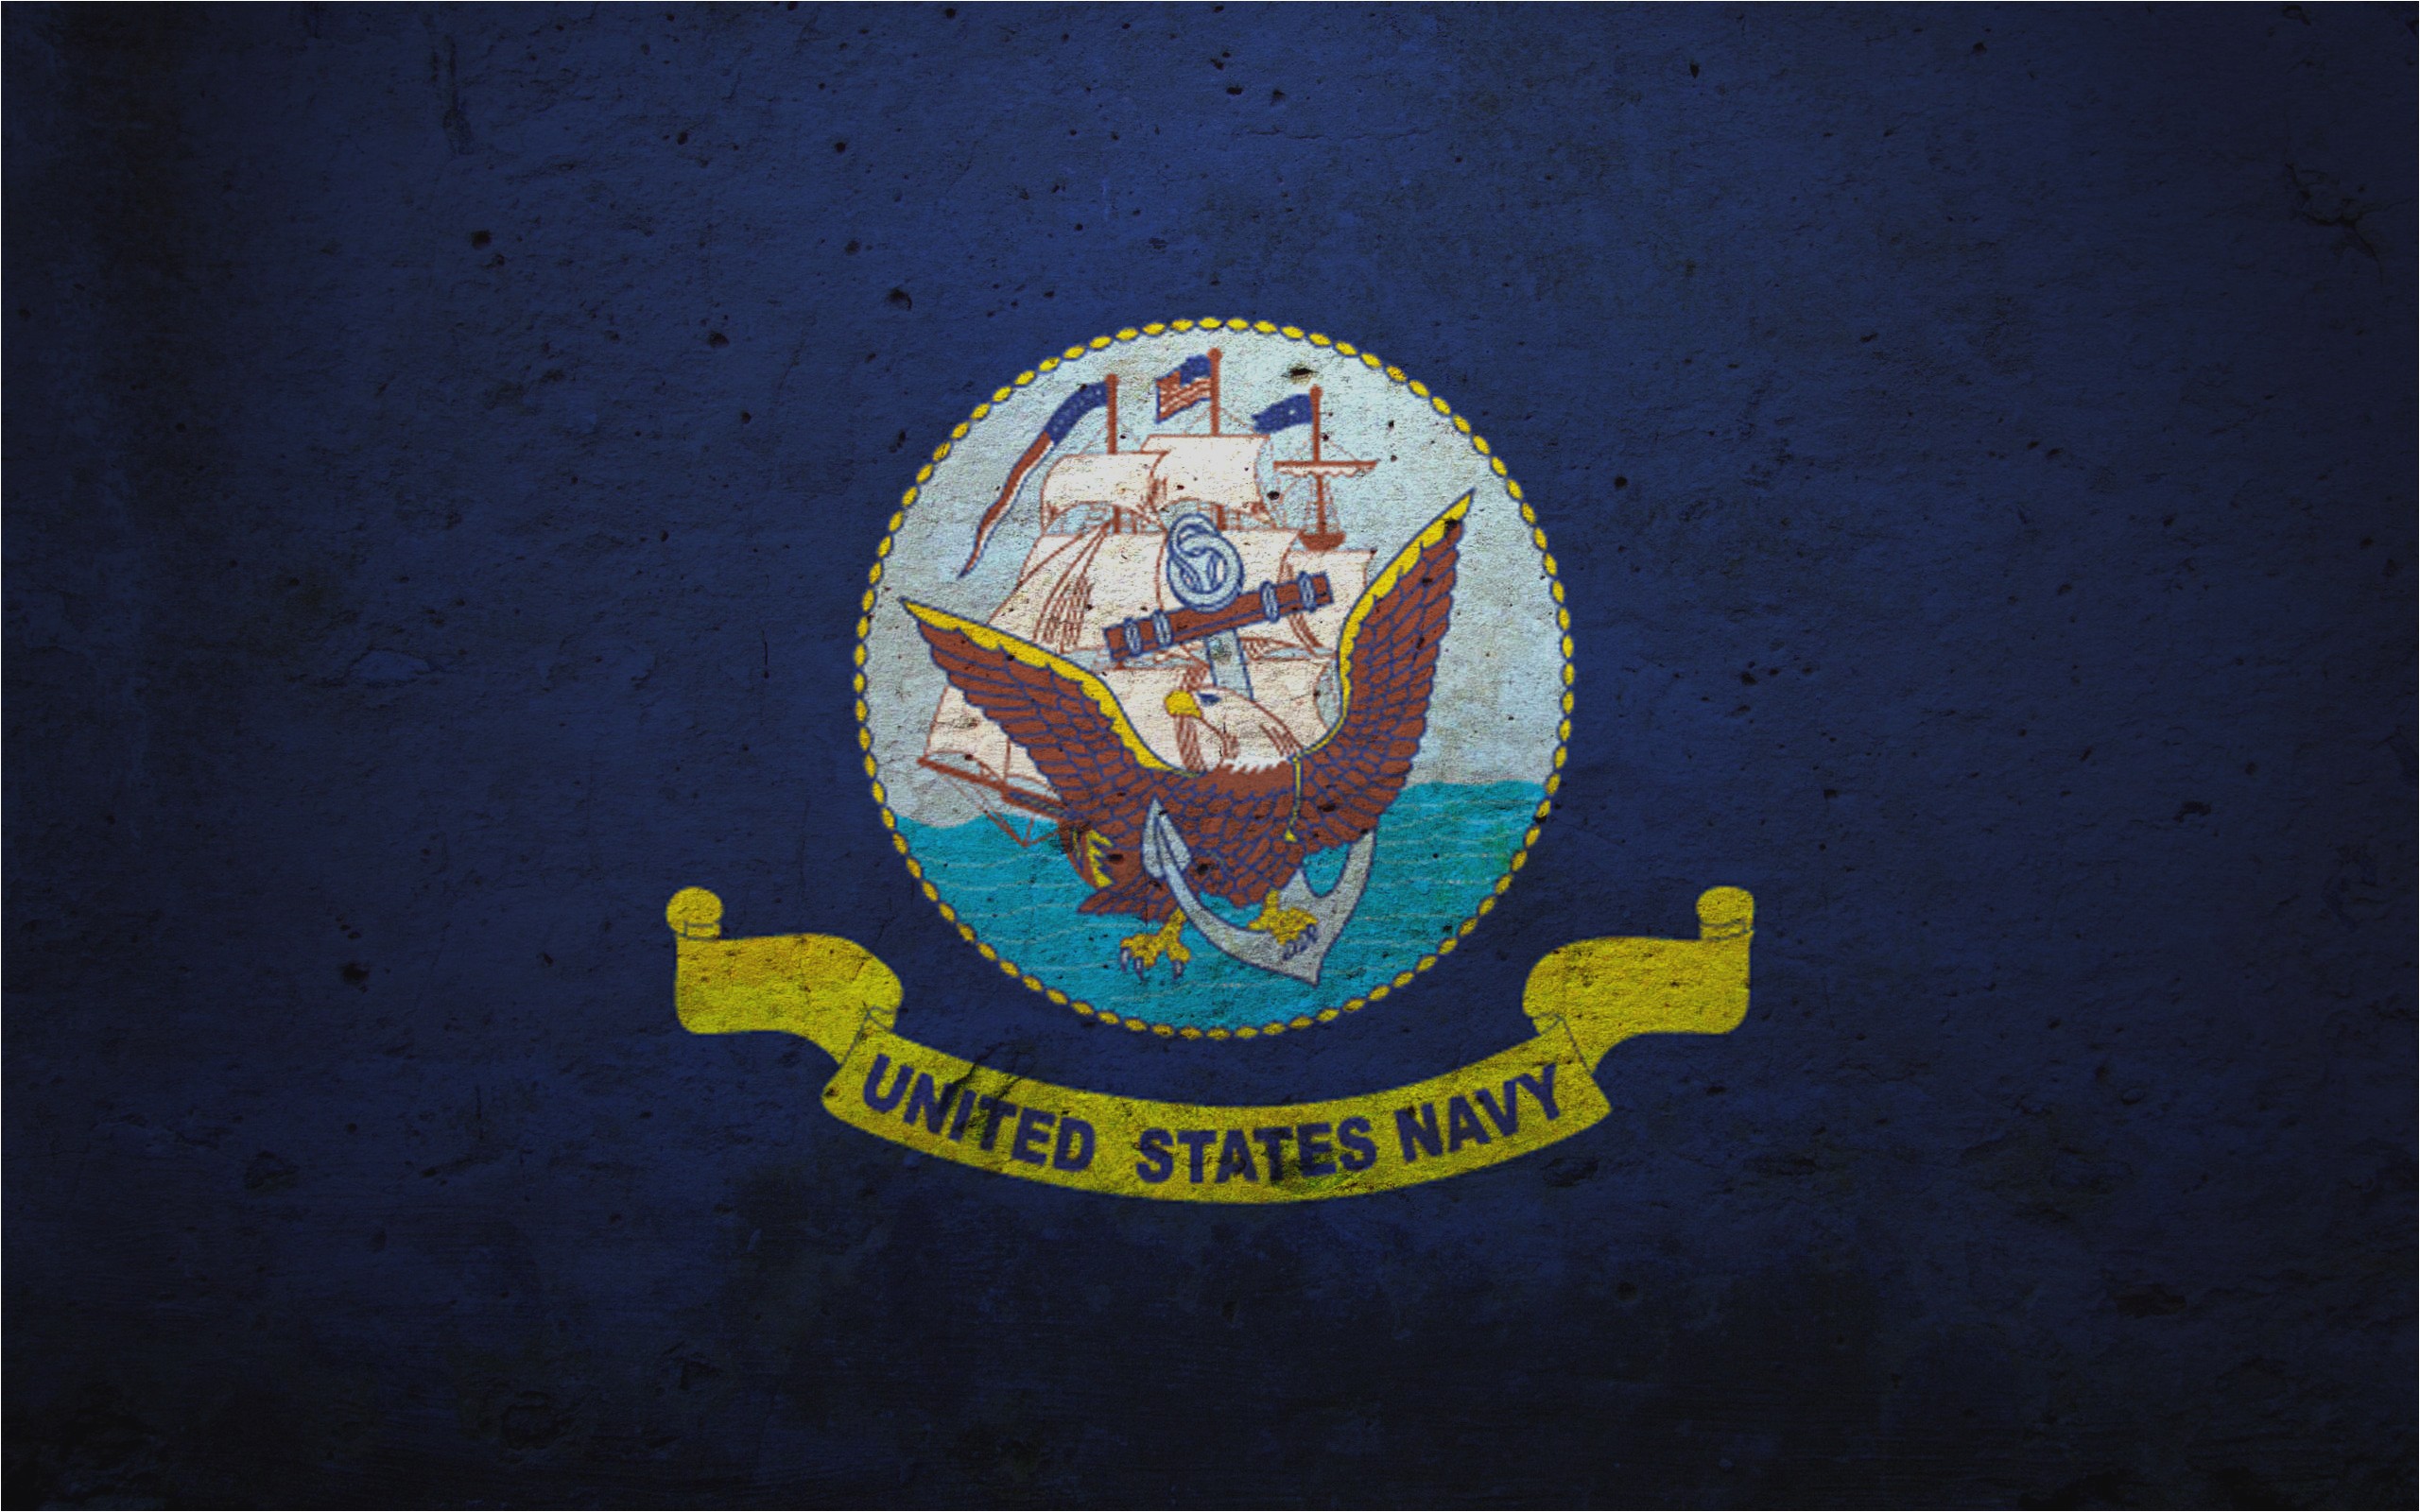 Ncis Wallpapers And Screensavers Px, - Happy Birthday Navy 244 - HD Wallpaper 